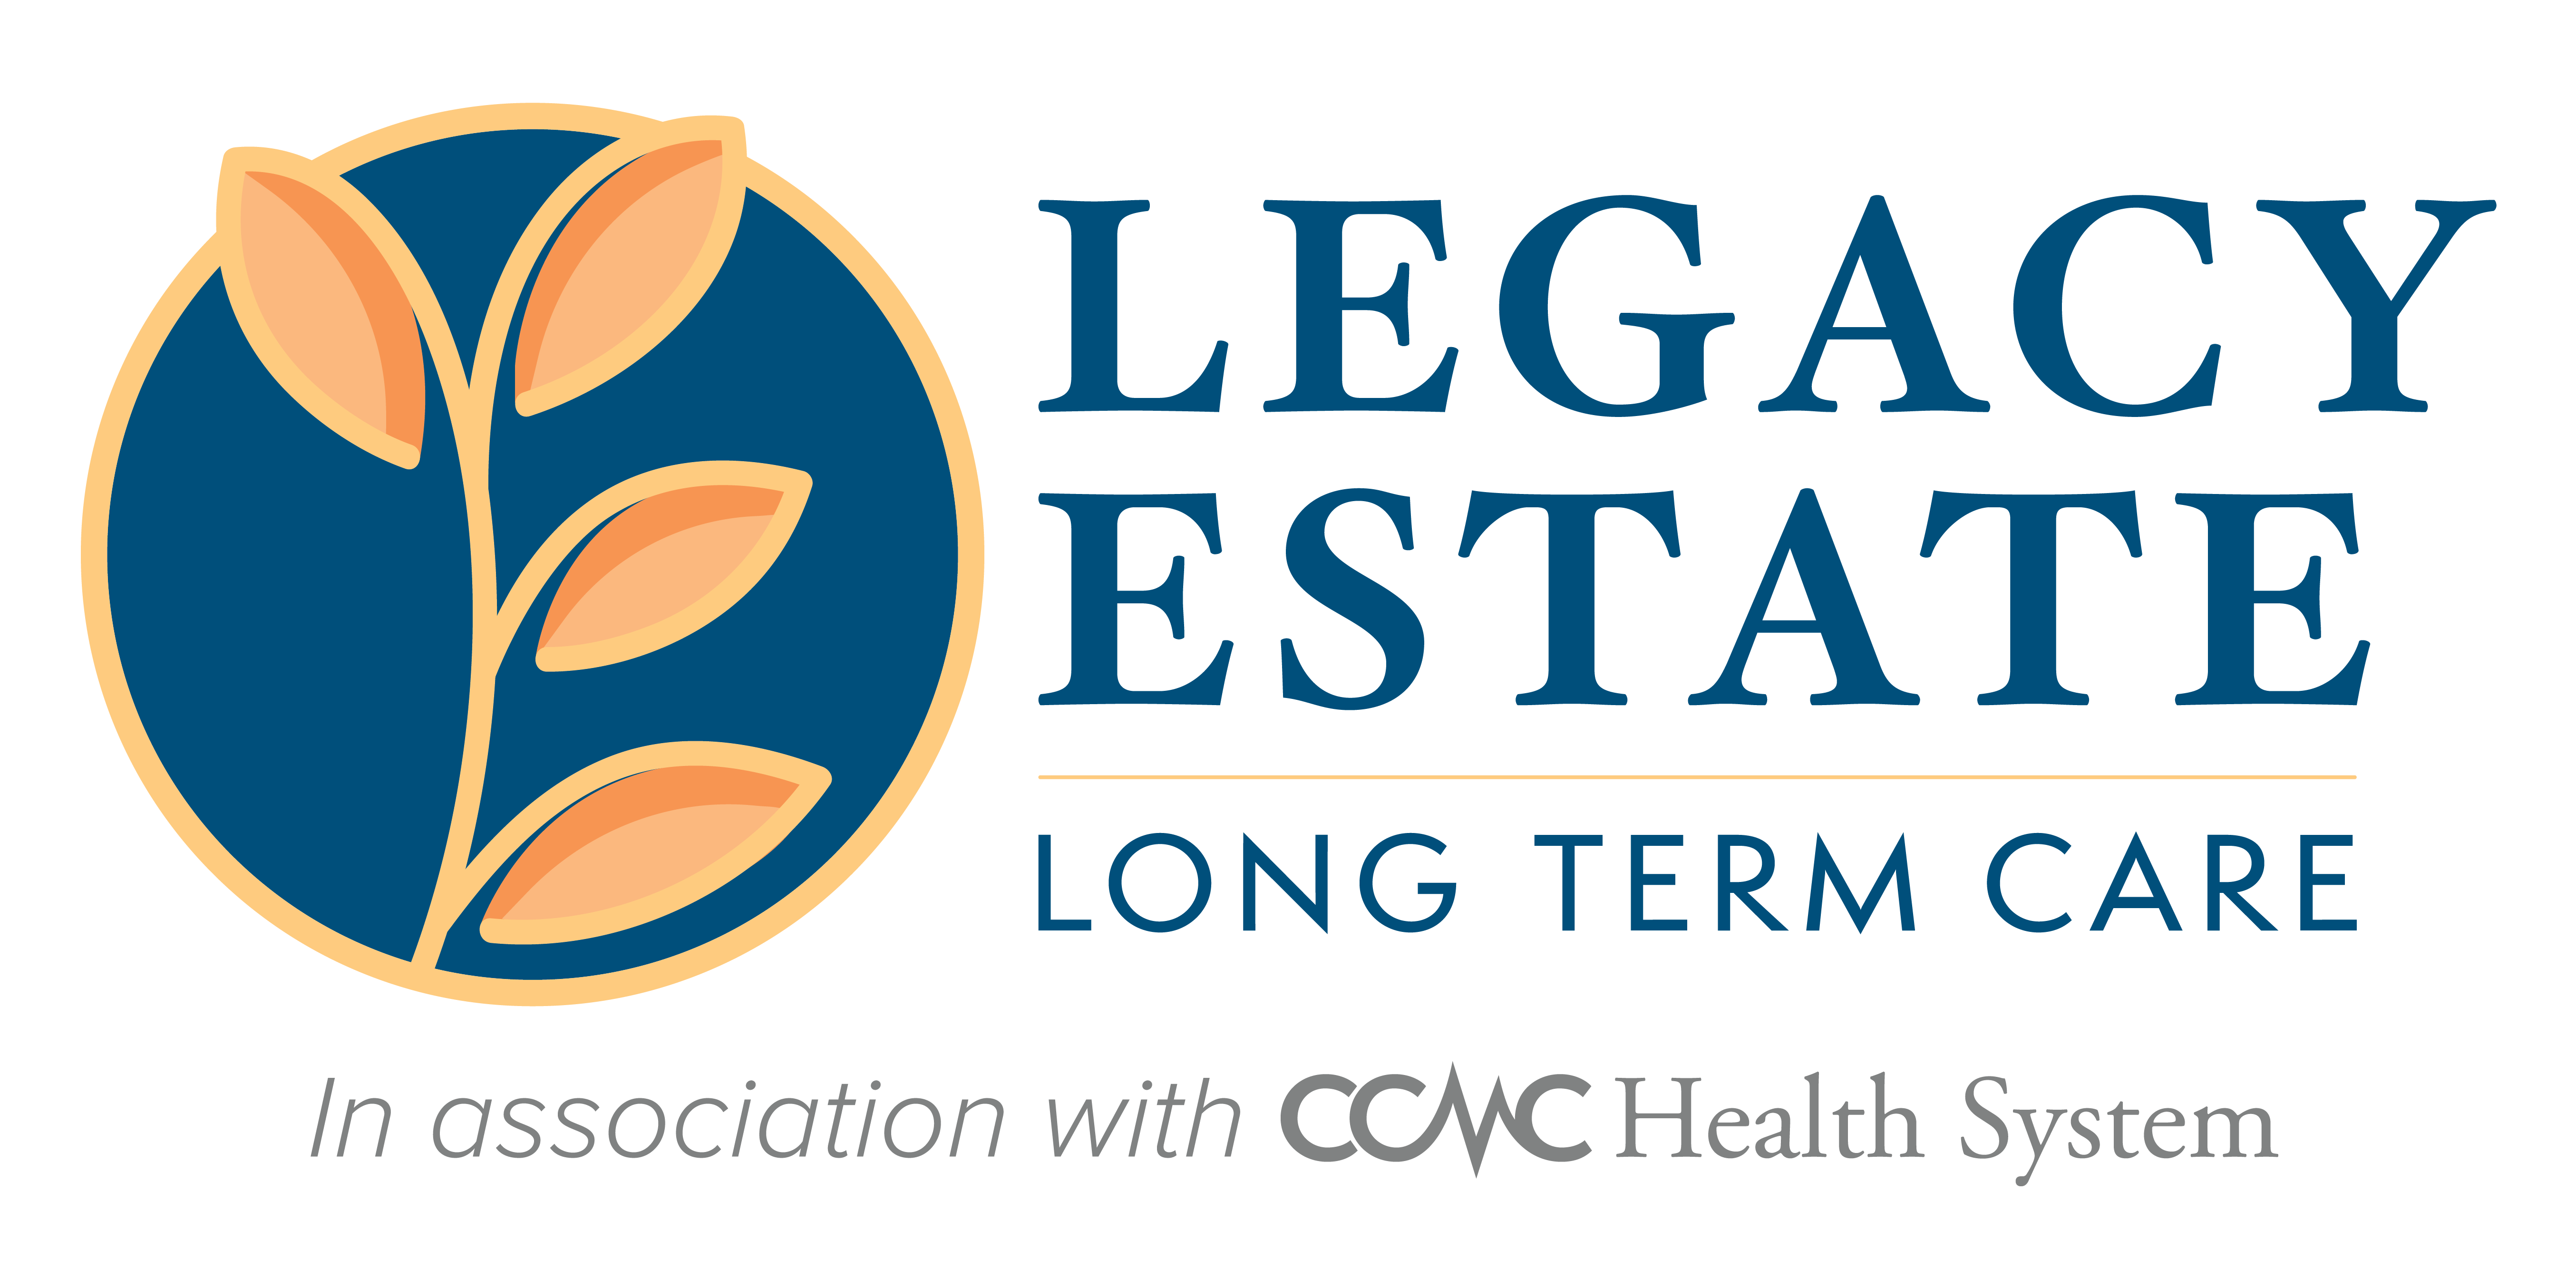 Legacy Estate, Long Term Care - In association with CCMC Health System Logo